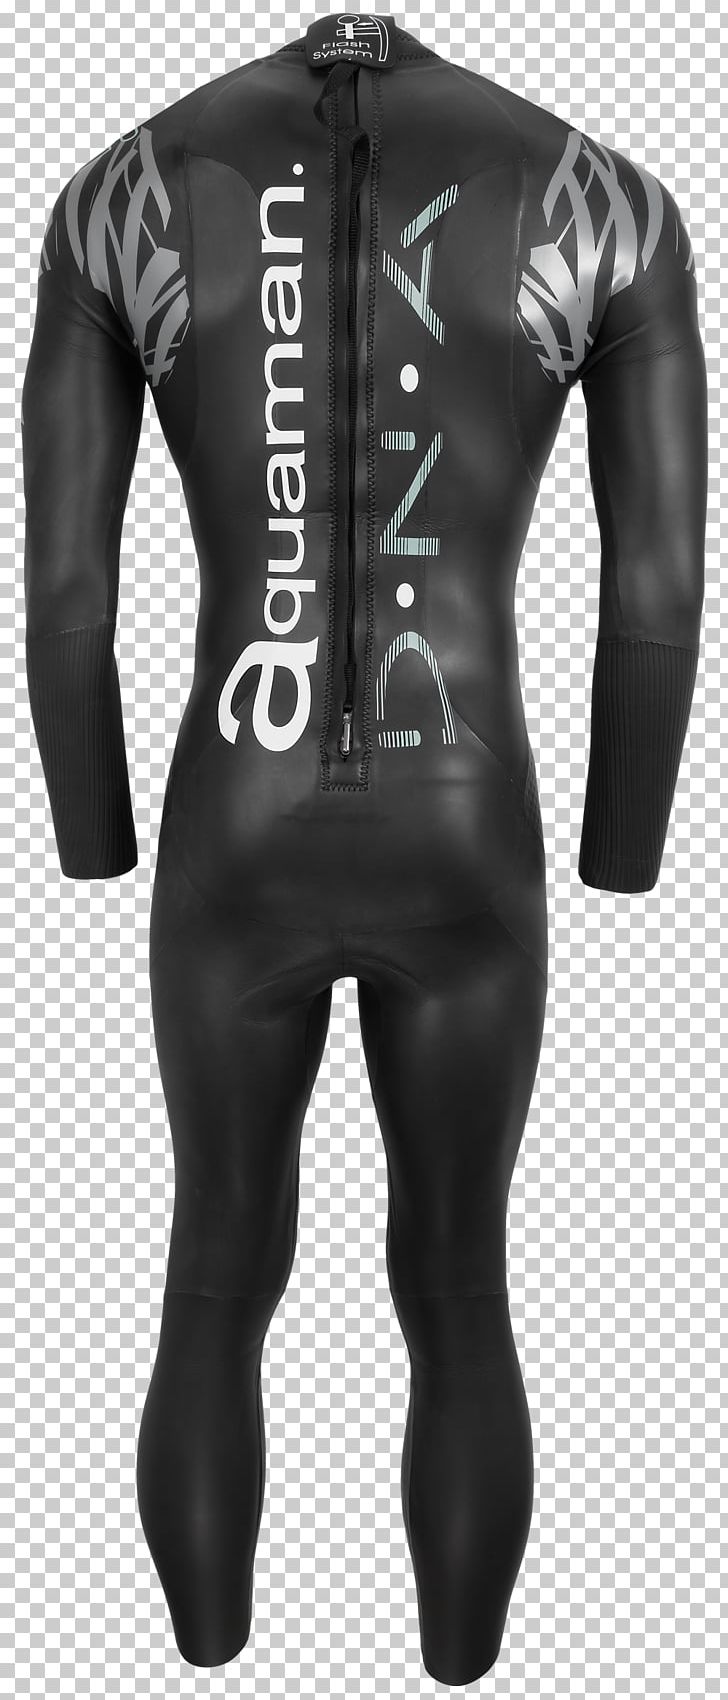 Wetsuit PNG, Clipart, Arm, Latex Clothing, Others, Personal Protective Equipment, Sleeve Free PNG Download